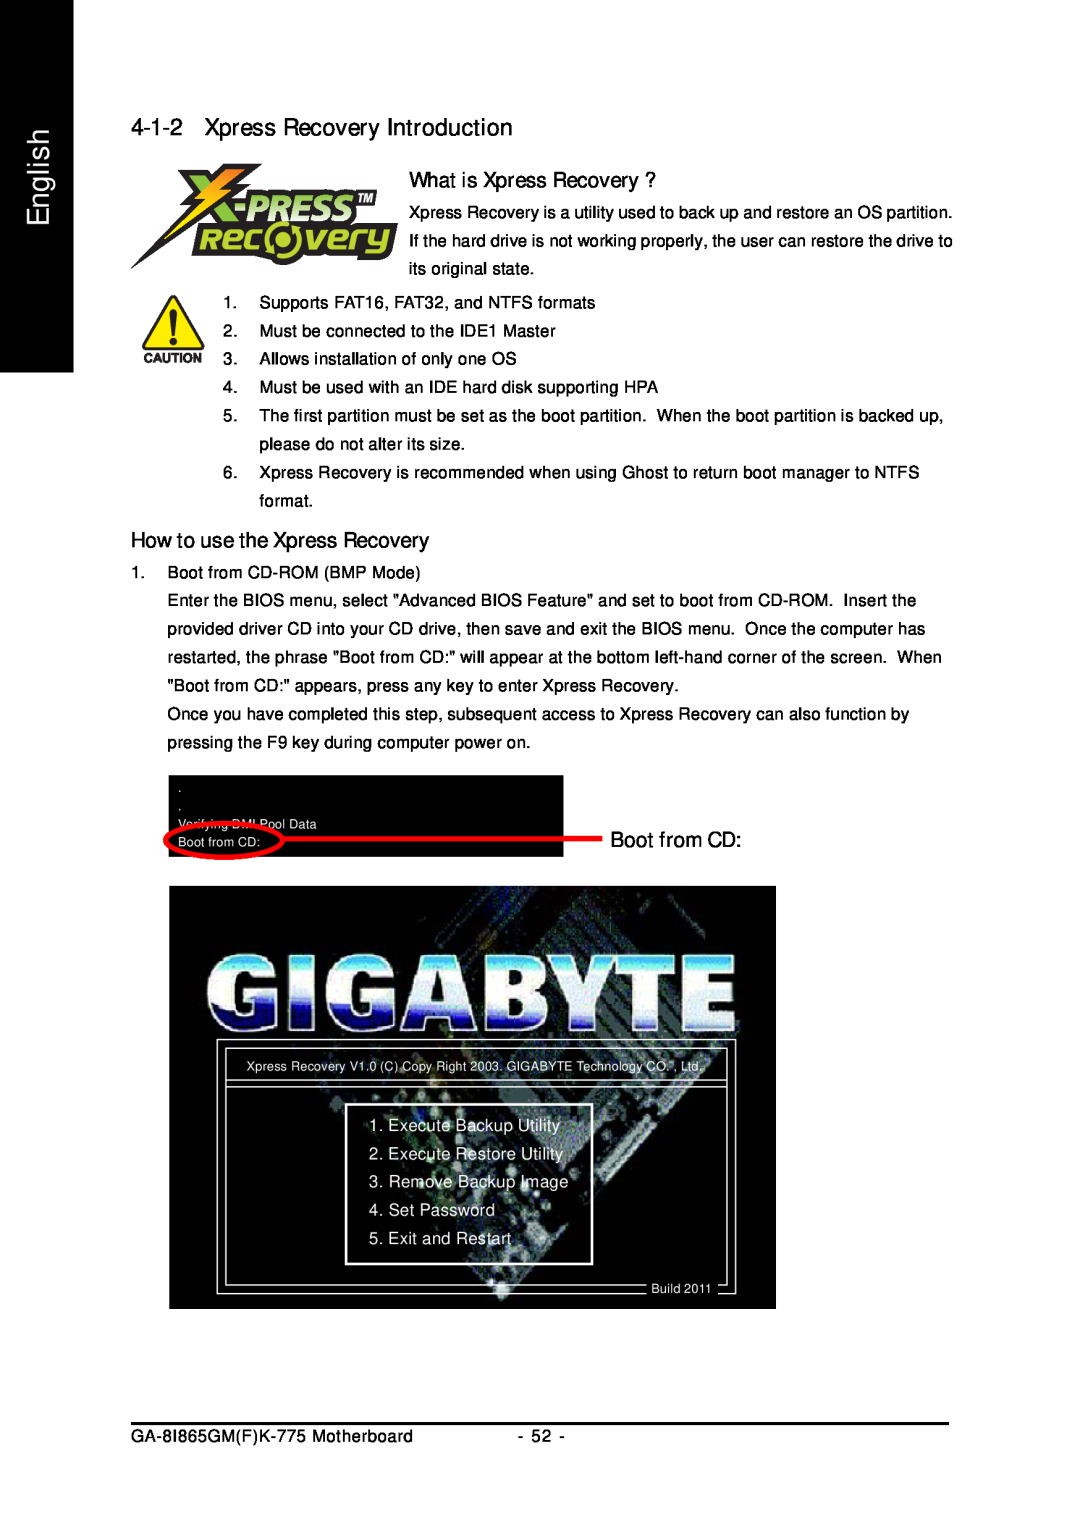 Gigabyte GA-8I865GMFK-775 Xpress Recovery Introduction, What is Xpress Recovery ?, How to use the Xpress Recovery, English 